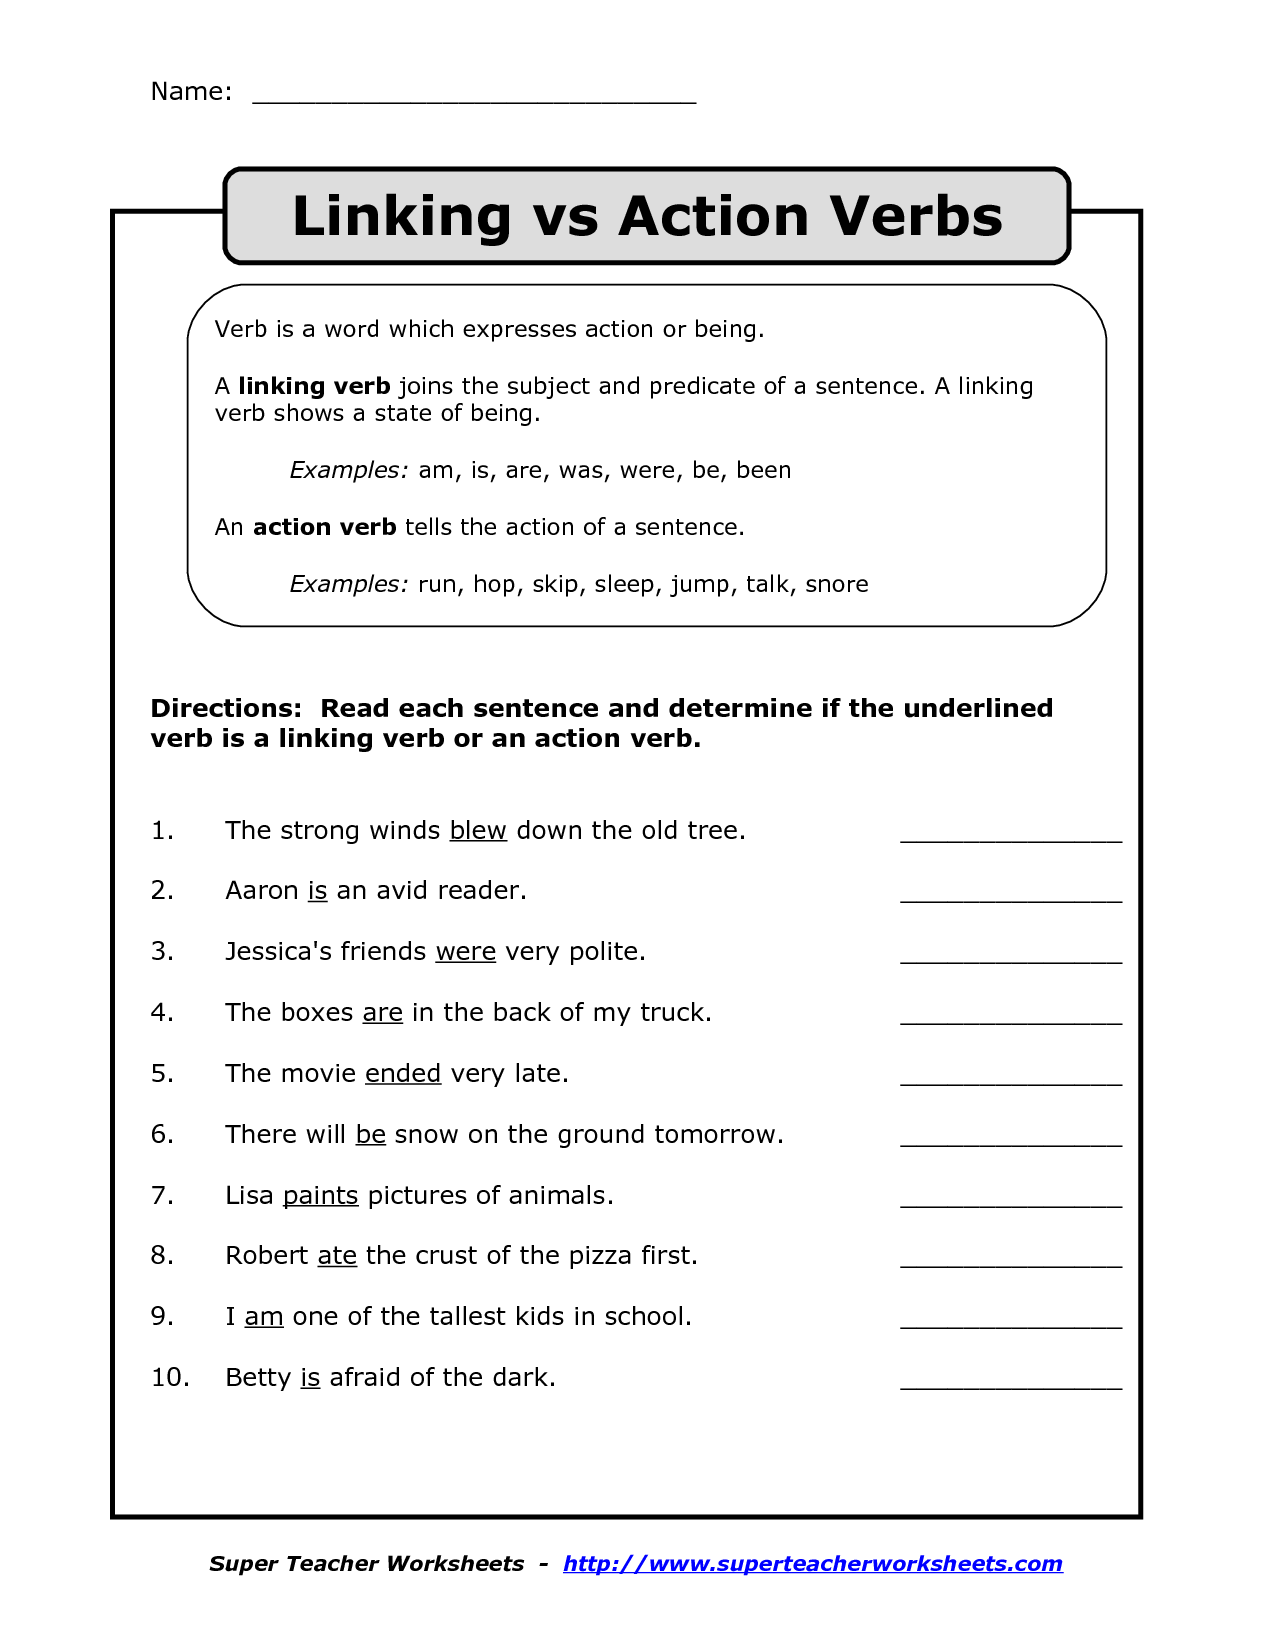 Identifying Linking Verbs And Action Verbs Worksheet